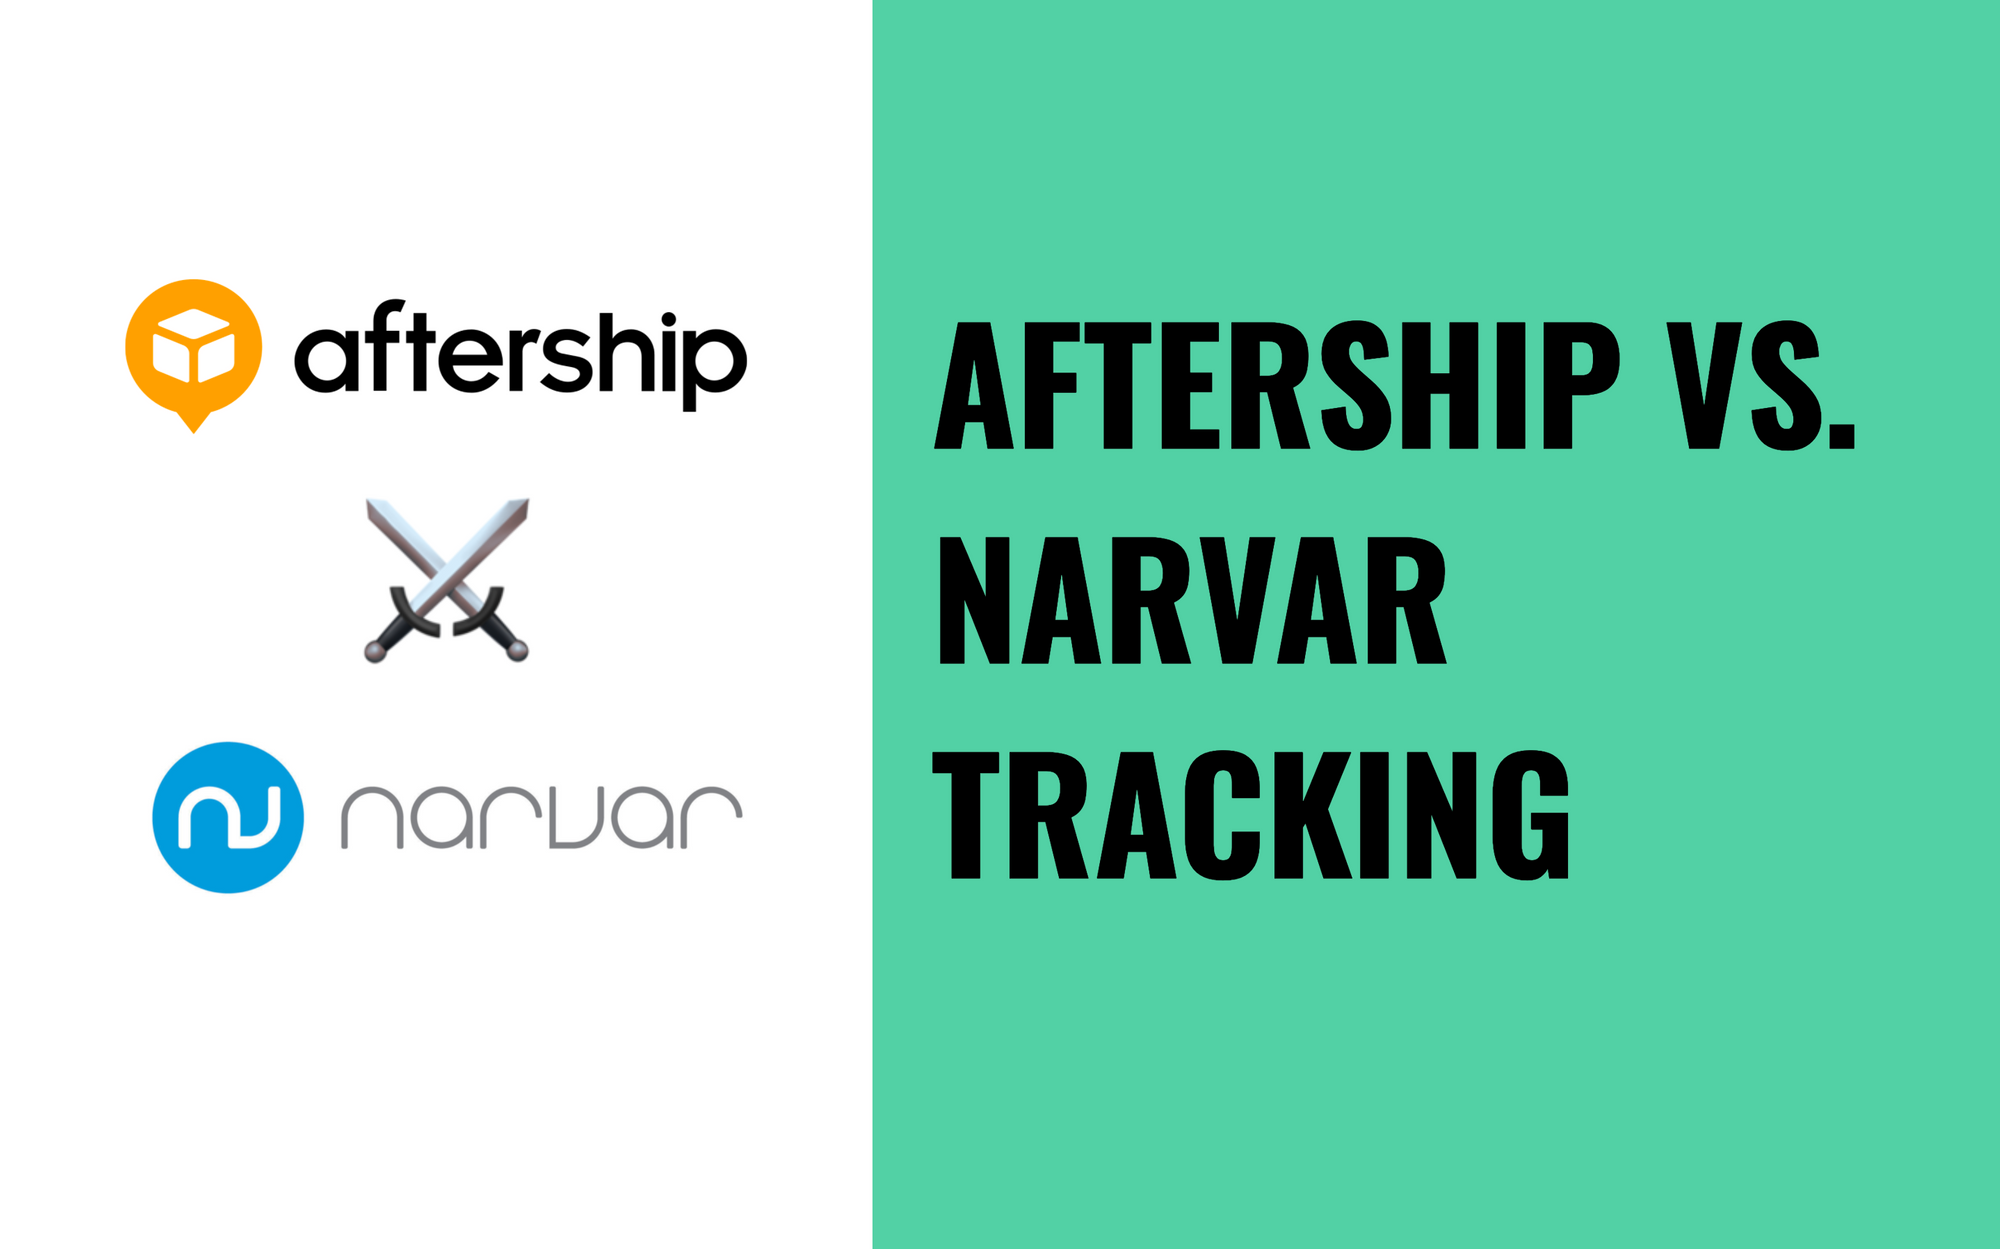 Narvar tracking Vs. AfterShip: Which is best for your business?